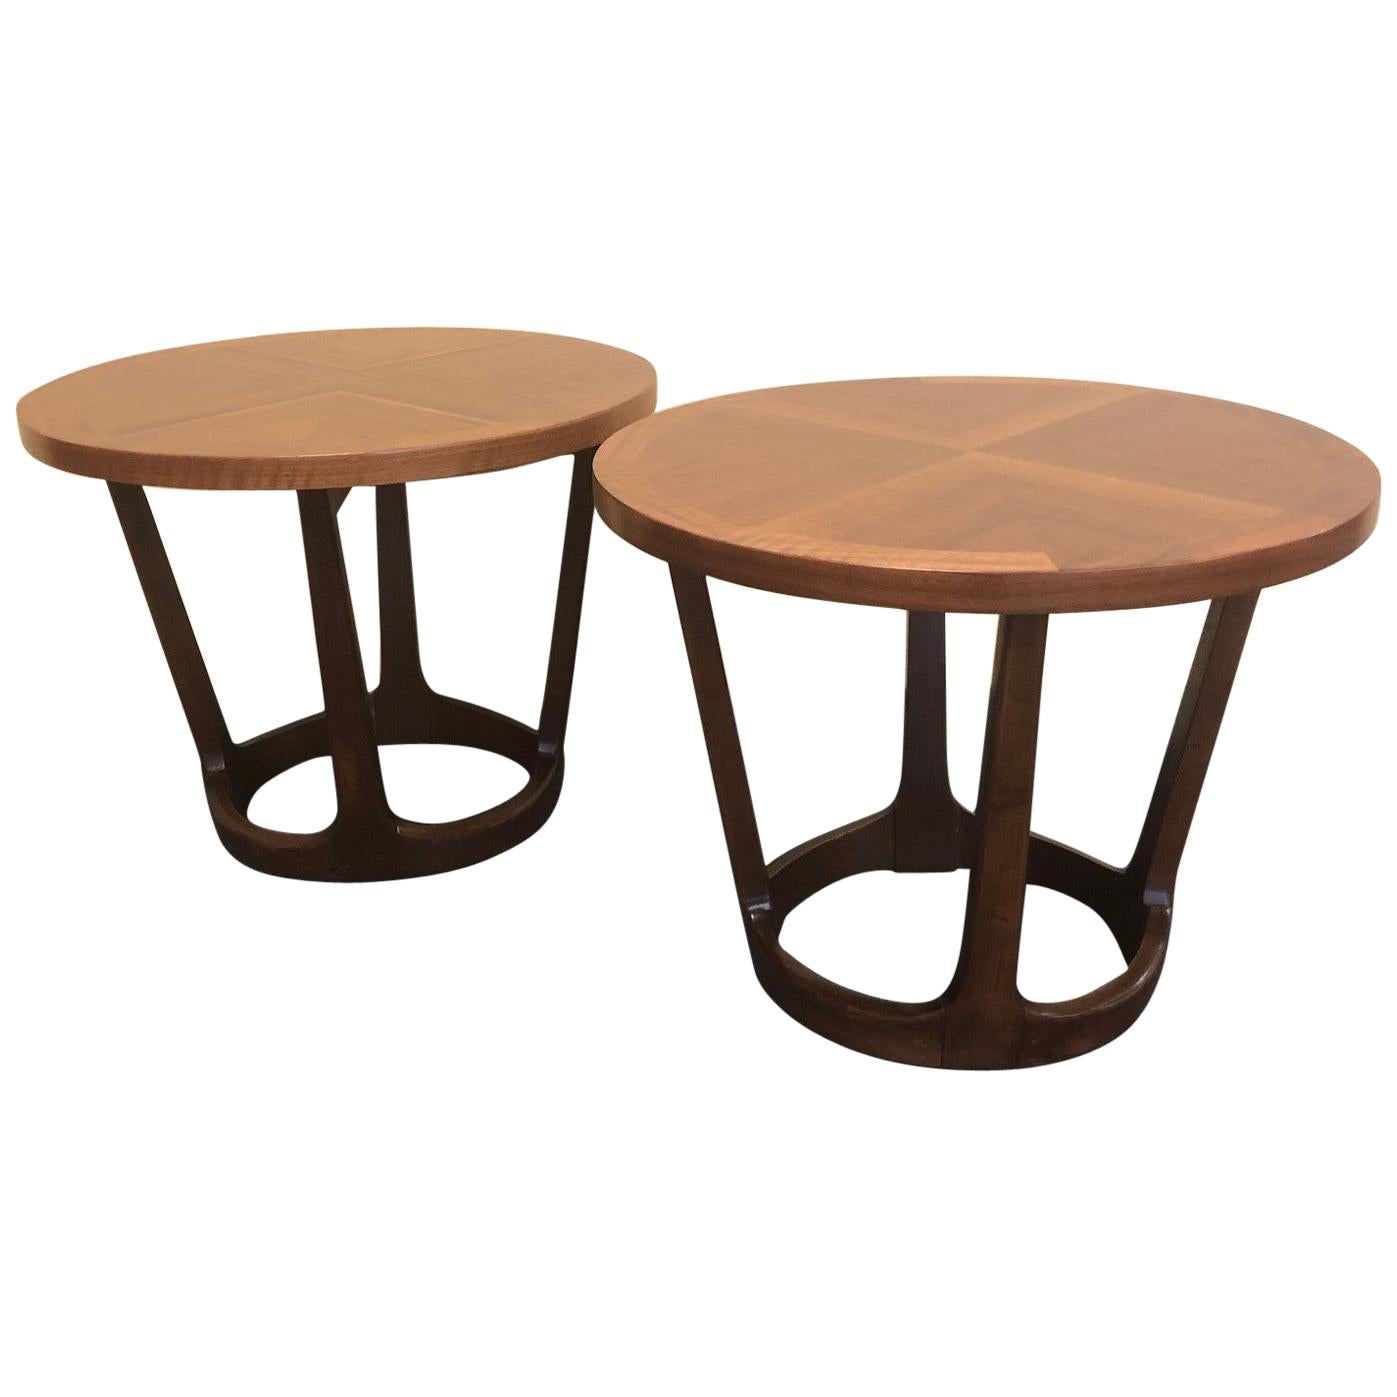 Pair of American Modern Walnut End / Side Tables by Lane Furniture